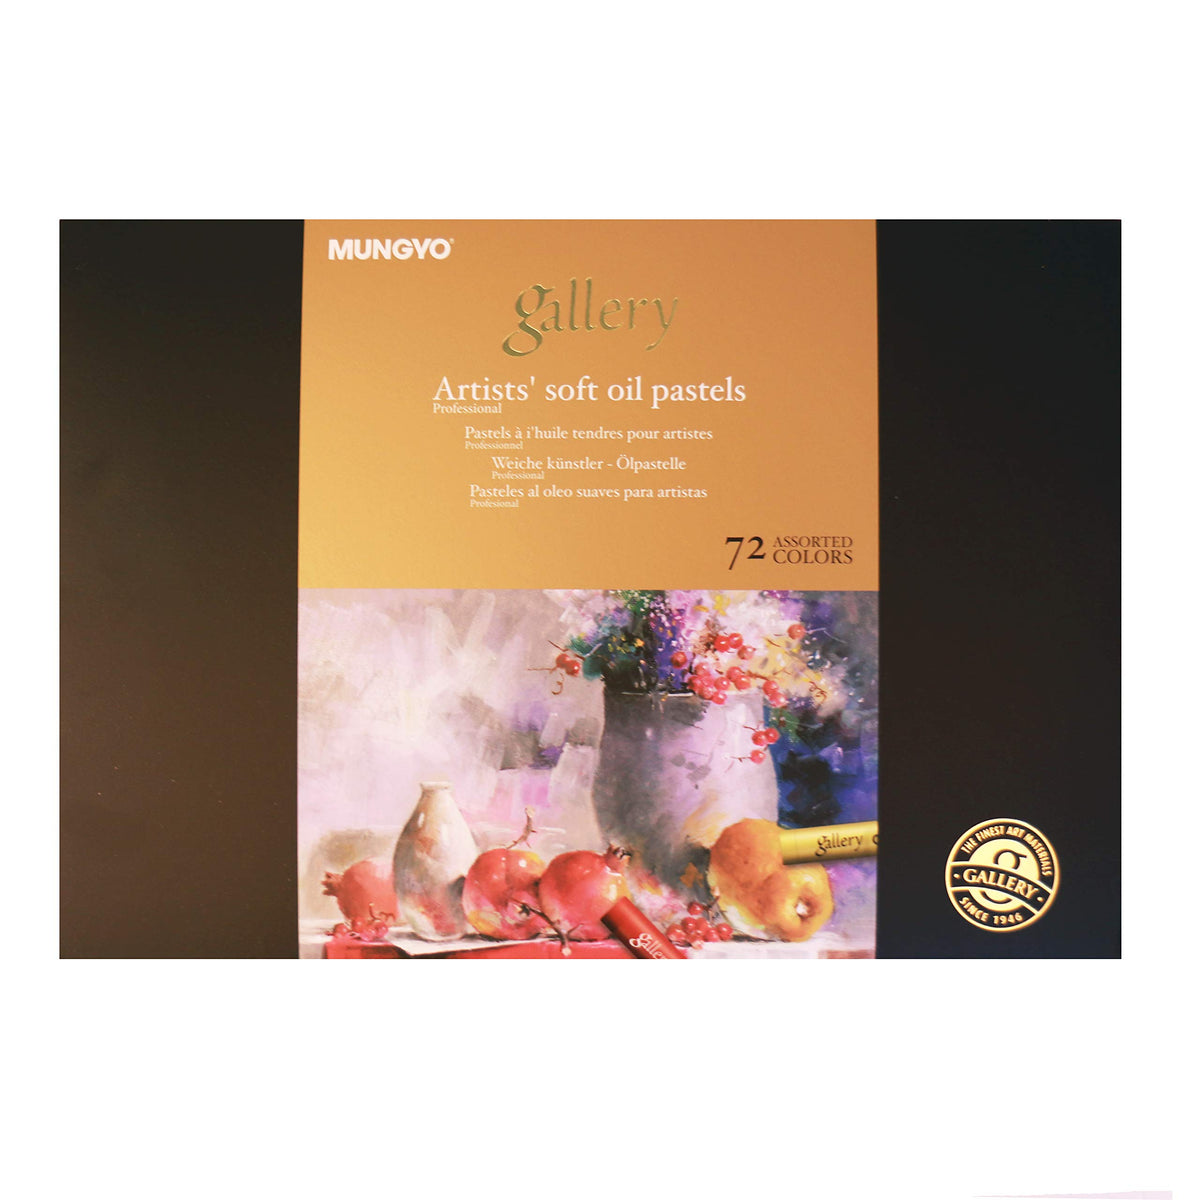 Mungyo Gallery Artists' Soft Pastel Squares Cardboard Box Set of 48 - Assorted Colors